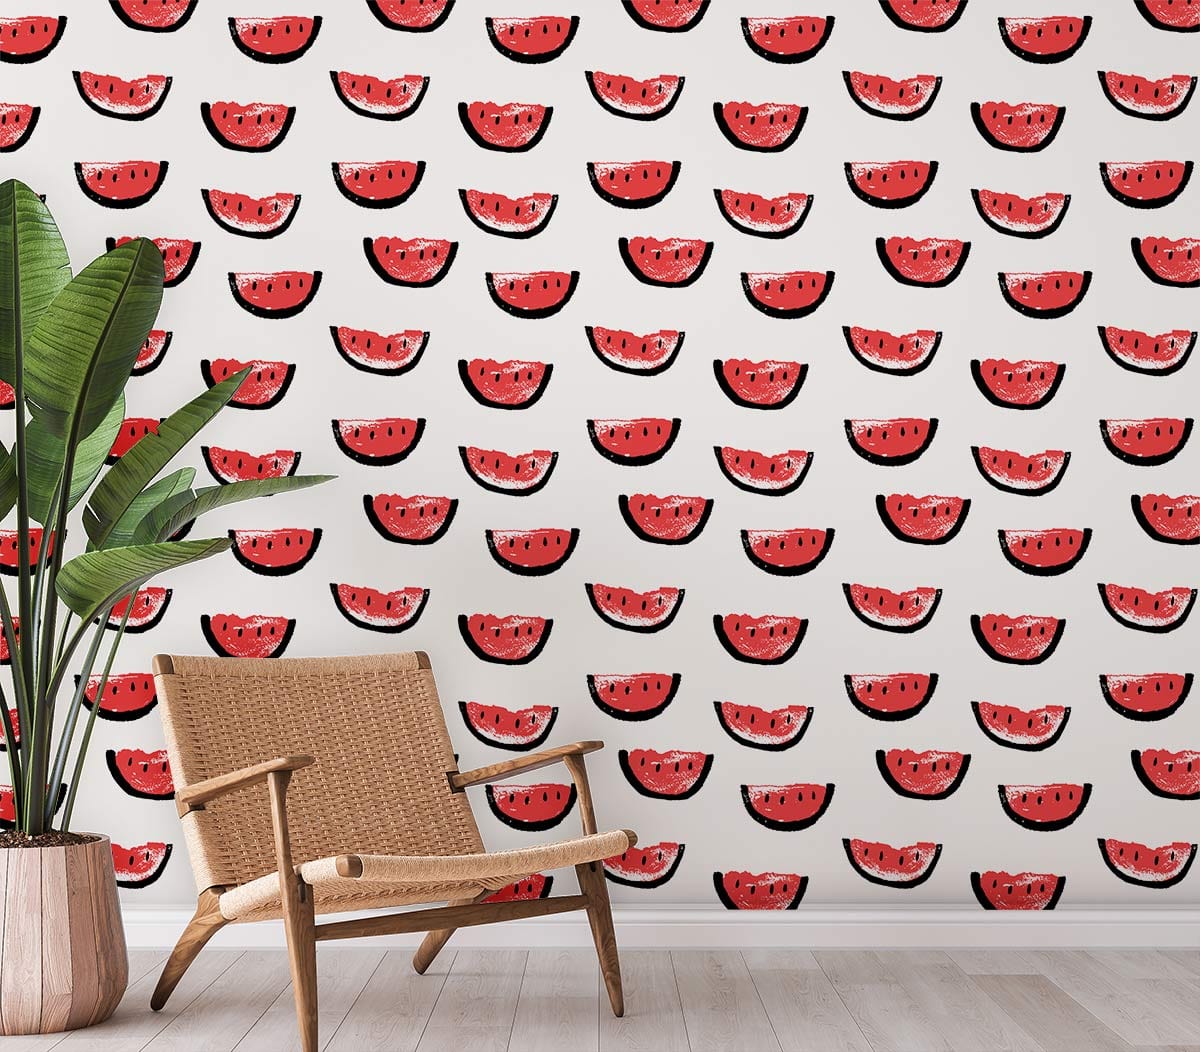 painted Watermelon Wallpaper Mural for hallway decor